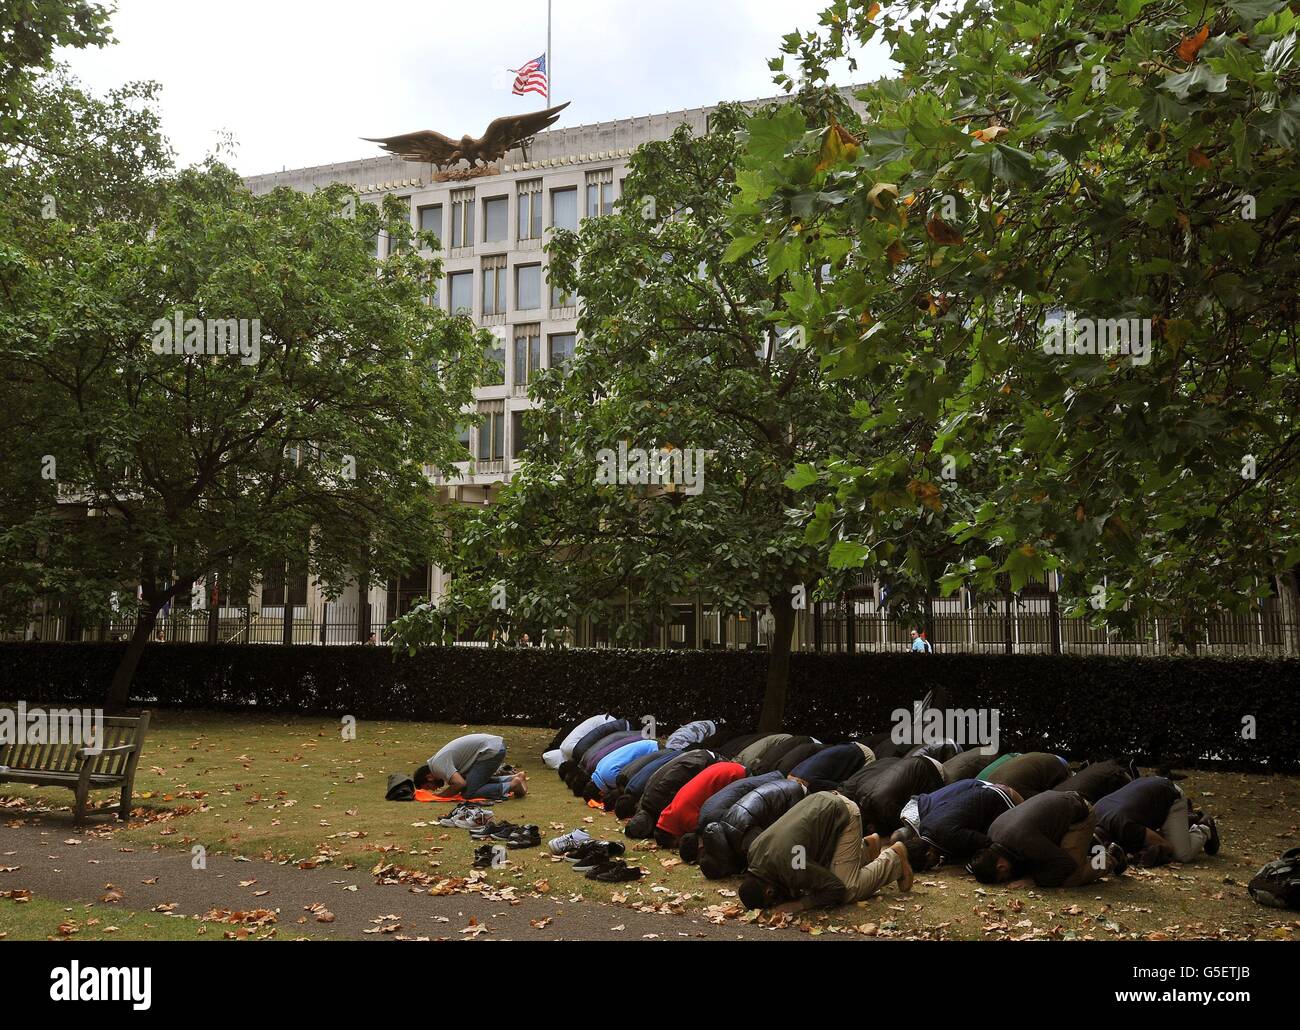 Muslim pressure group Hizb ut-Tahrir, who campaign for an Islamic state with sharia law, protest outside the US embassy in Grosvenor Square, London, over a film mocking the prophet Muhammad. Stock Photo